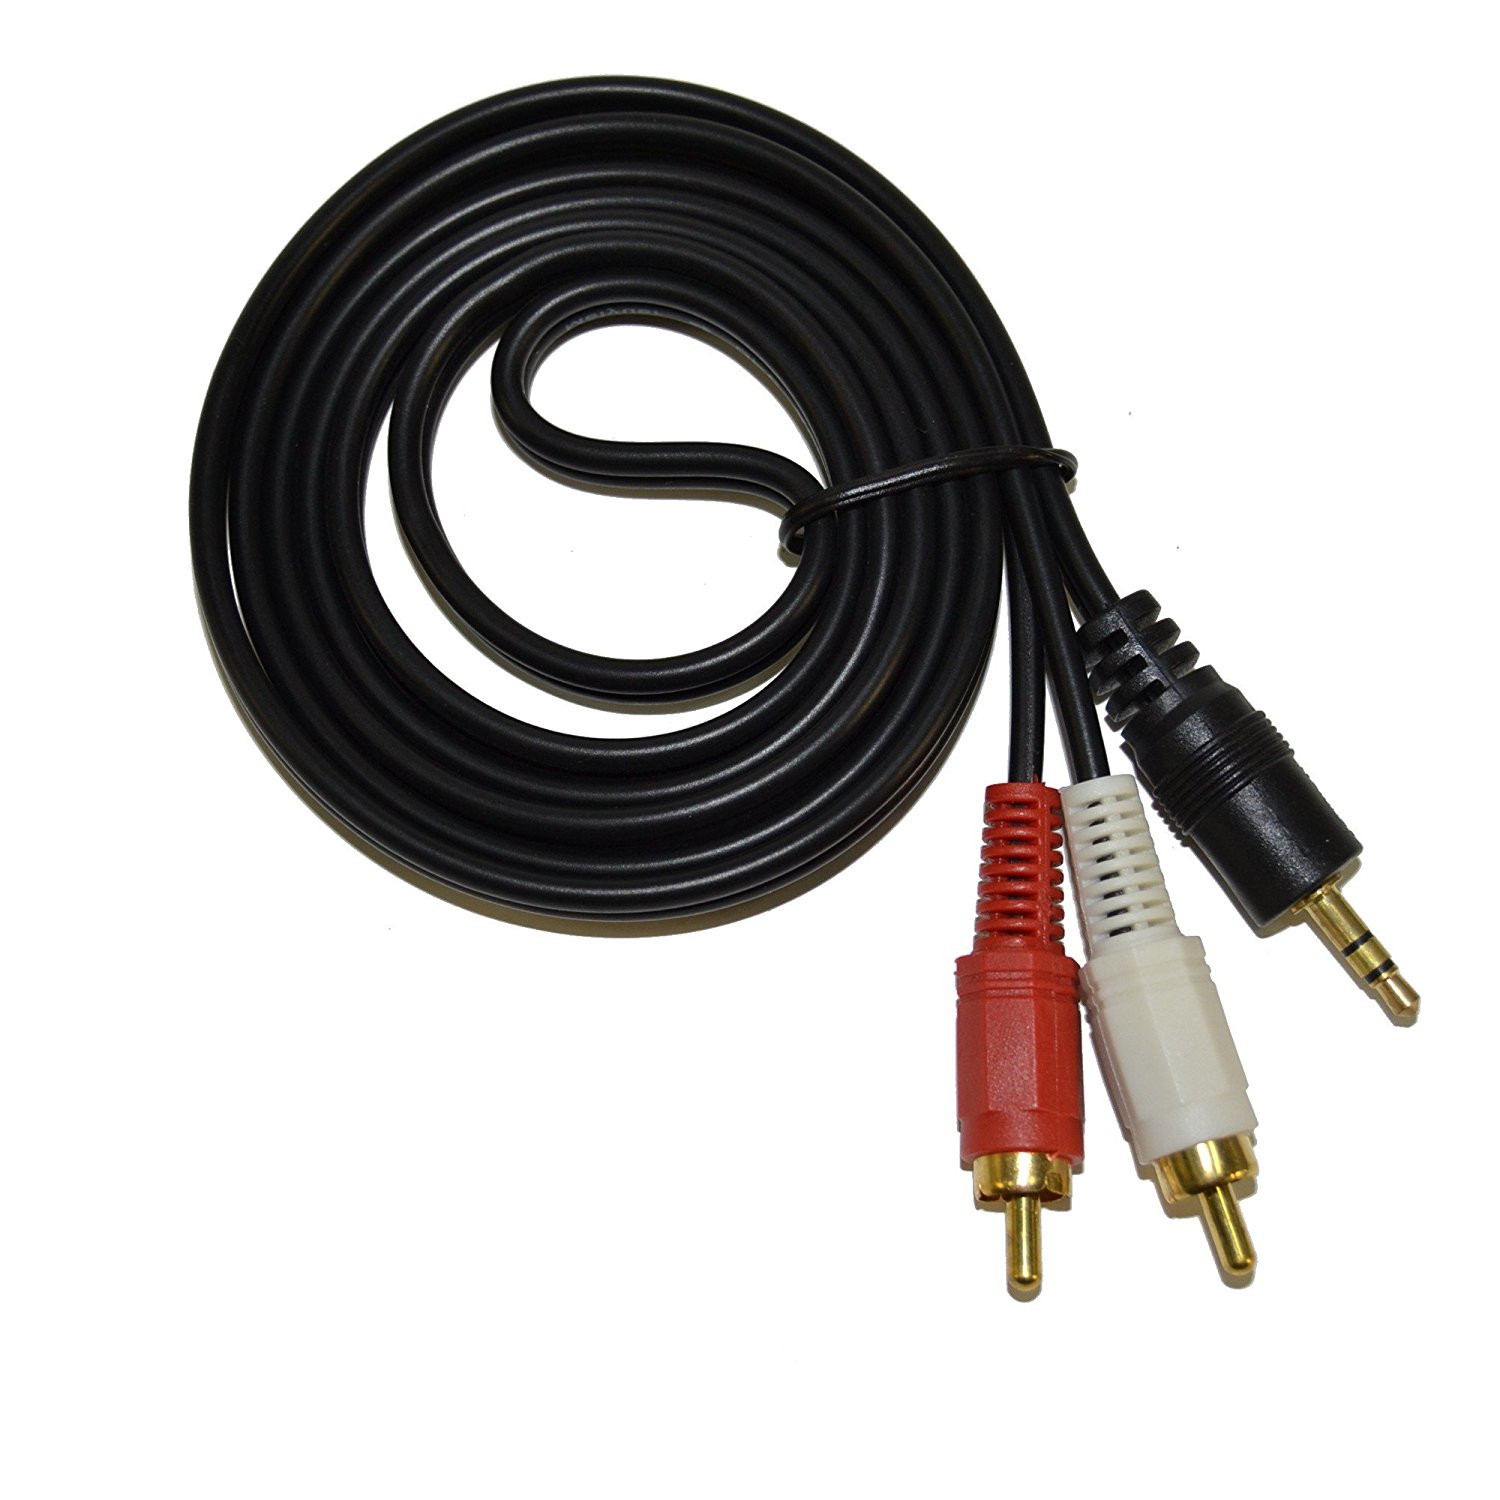 HQRP Stereo RCA to 3.5mm Audio Cable for Acoustic Research AWS73 / AW825 / AW851 Portable Wireless Speaker Transmitter Mini Plug Cord Y-Splitter 5ft - image 1 of 7